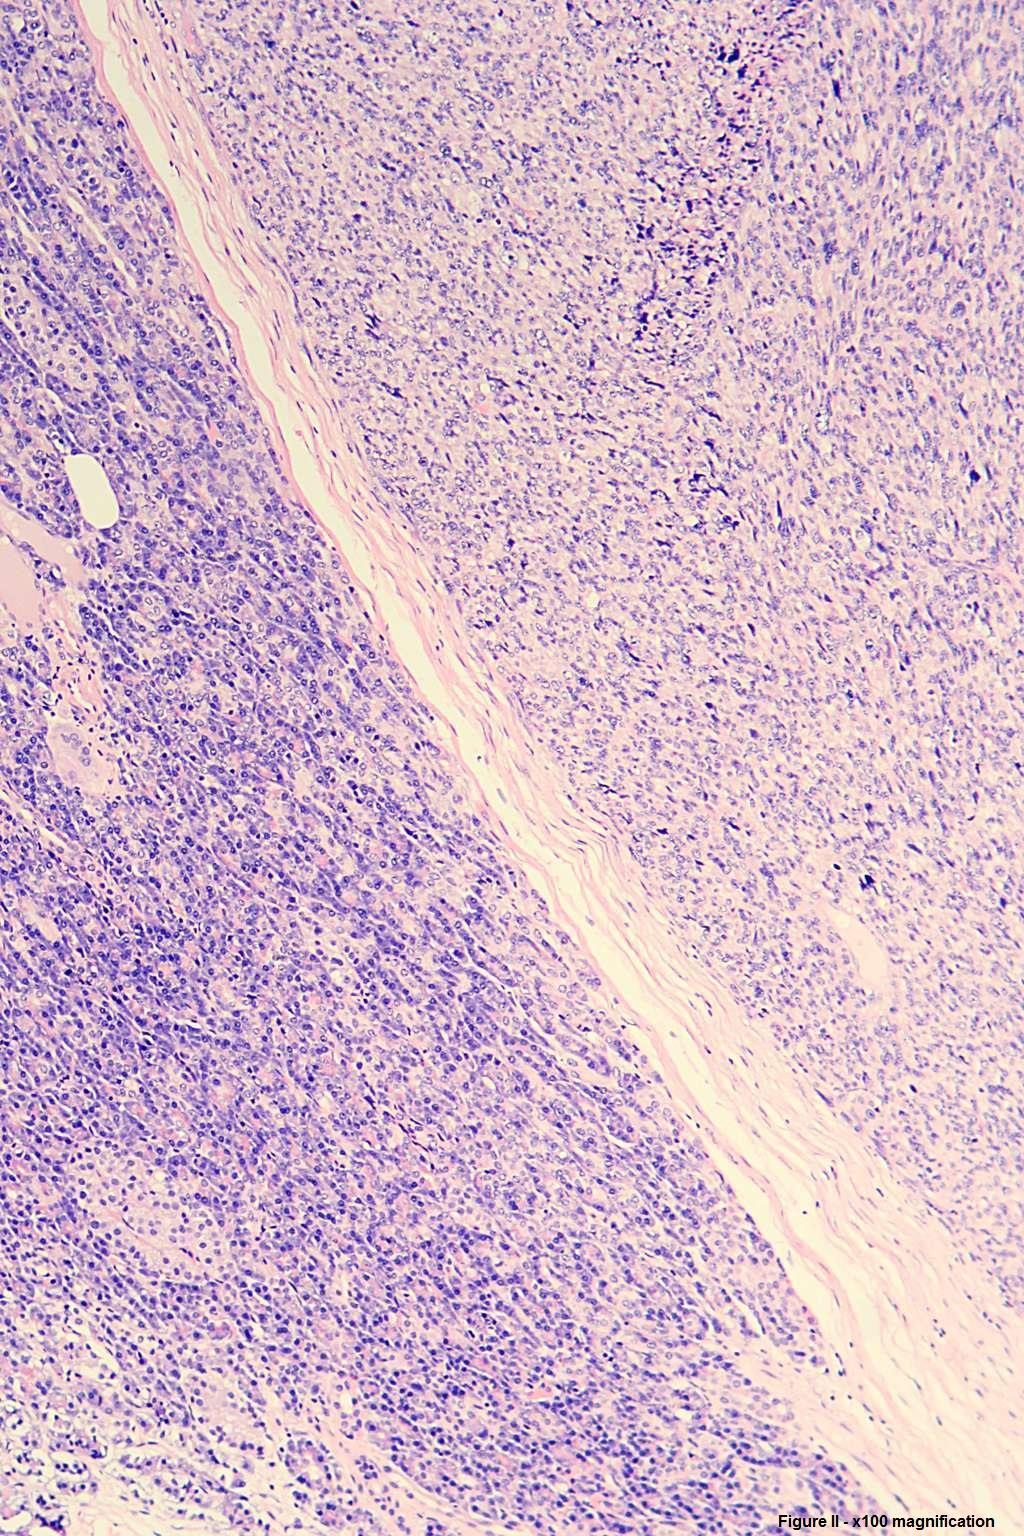 godre Case Report Figure 2: (H&E x100 magnification) A thin fibrous capsule separates the leiomyosarcoma in the top right half of the image from the normal pancreatic tissue in the bottom left